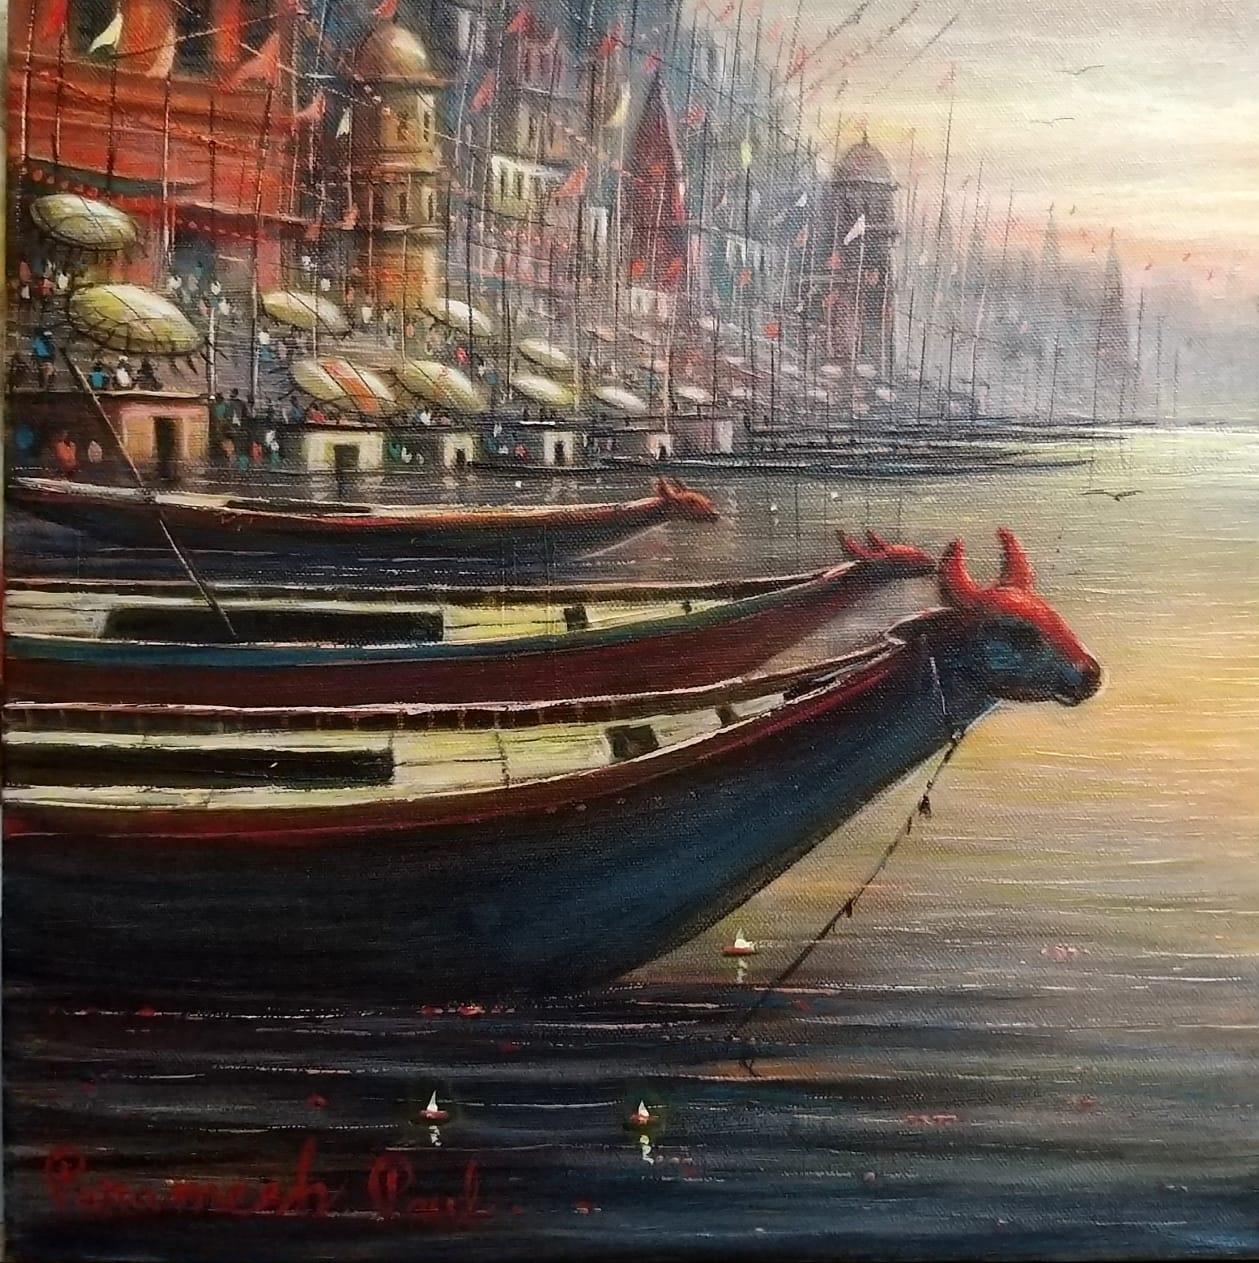 Varanasi, Holy City, Acrylic on Canvas, Brown by Contemporary Artist "In Stock"